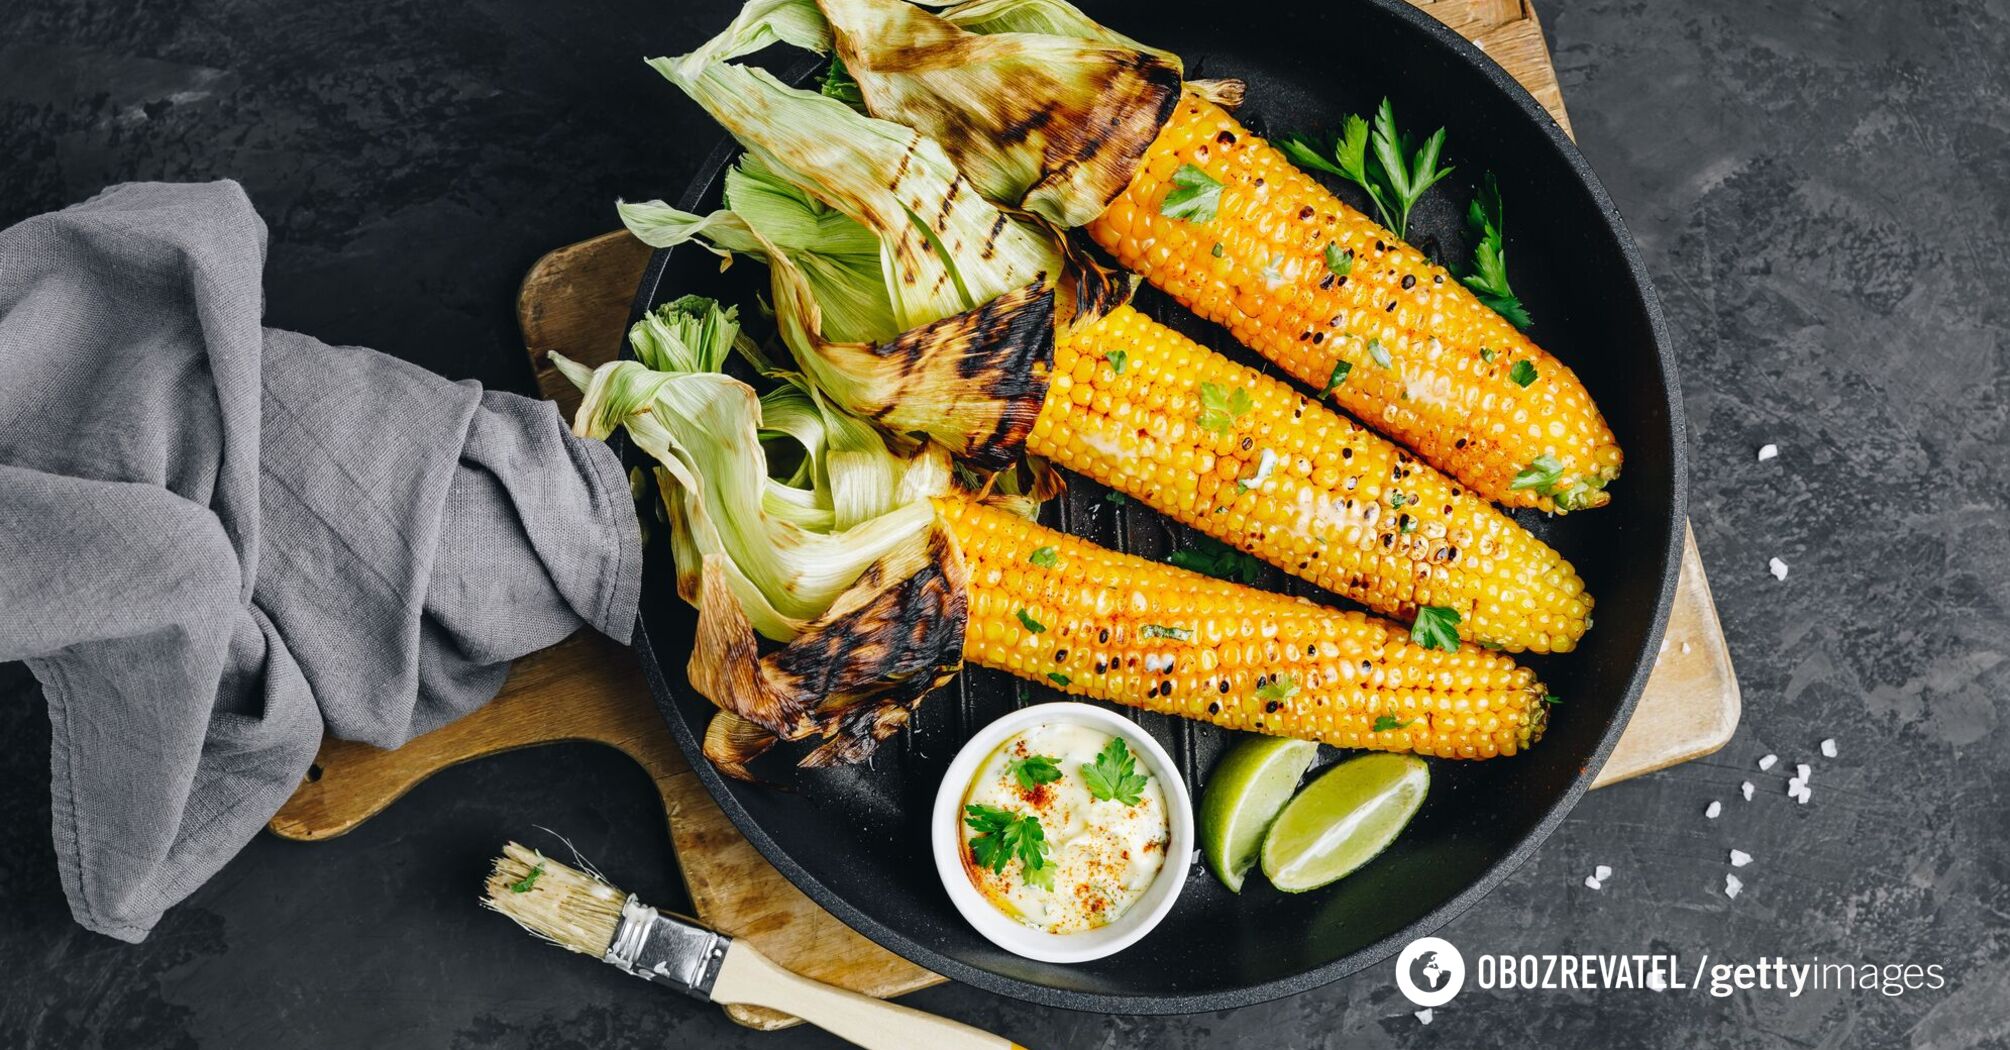 How to cook corn deliciously at home